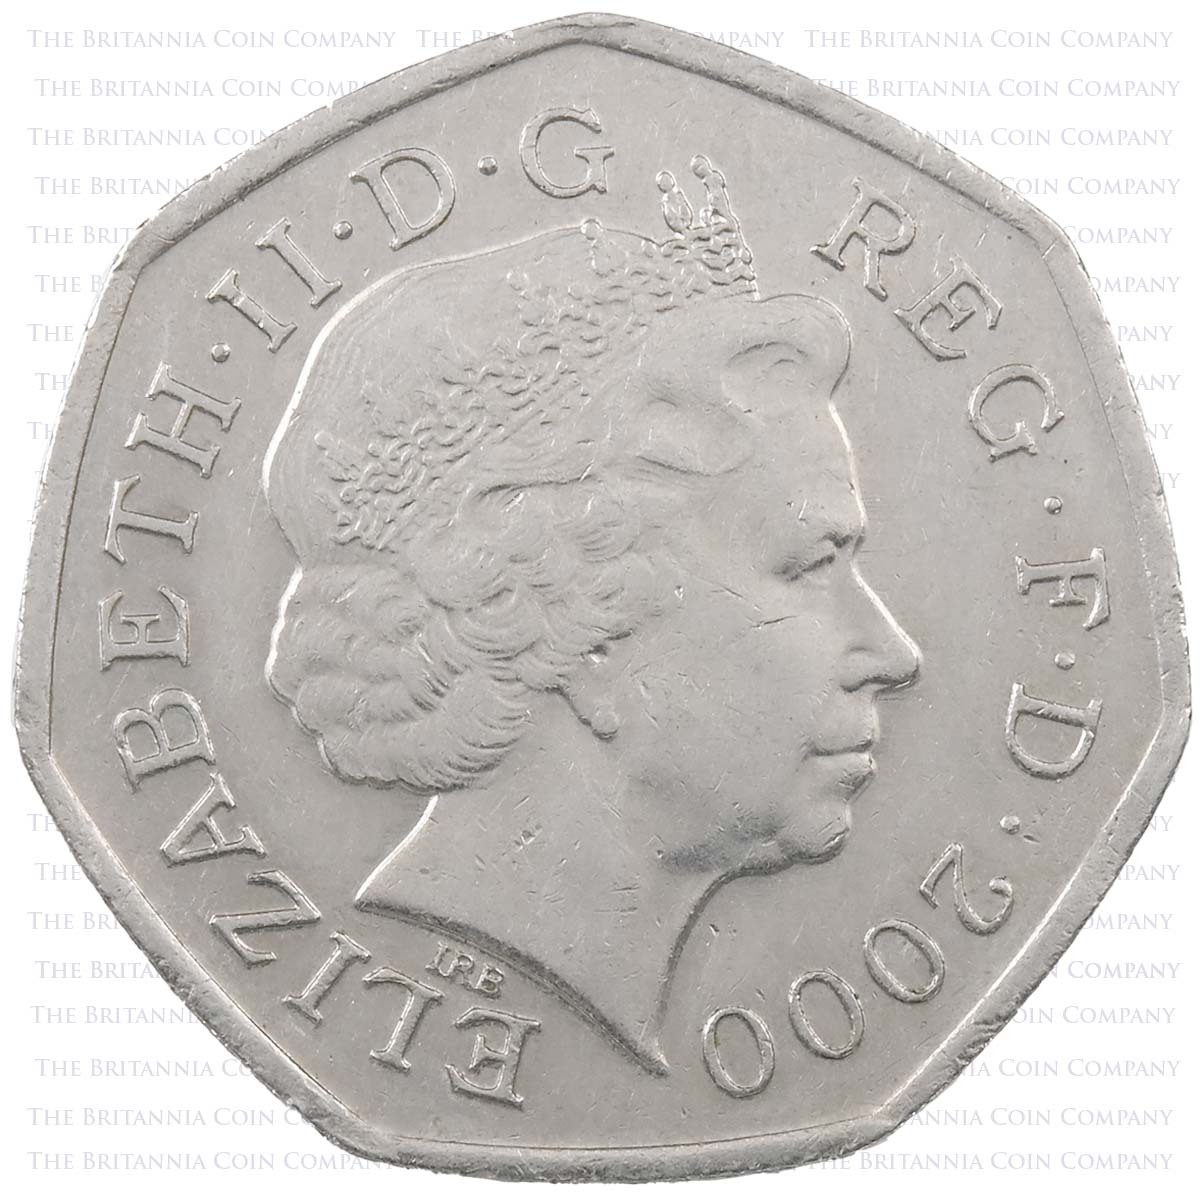 2000 Public Libraries Act Circulated Fifty Pence Coin Obverse